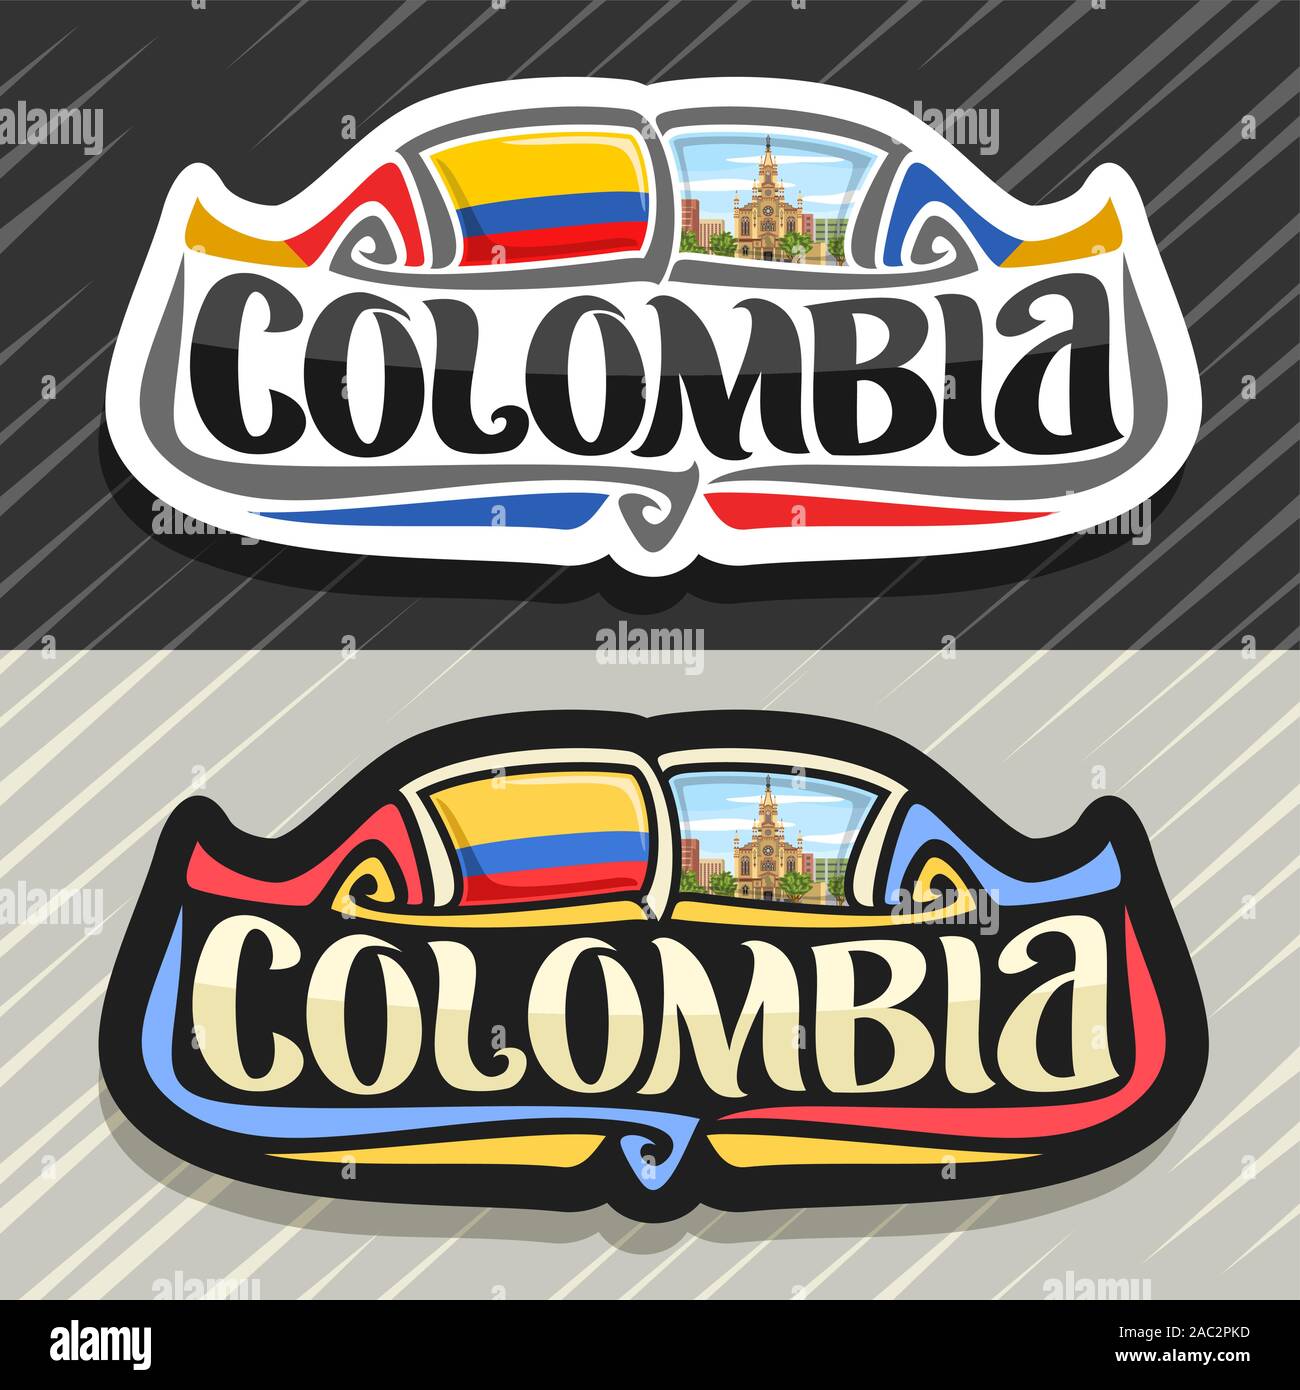 Vector logo for Colombia country, fridge magnet with colombian flag, original brush typeface for word colombia, national colombian symbol - Jesus Naza Stock Vector